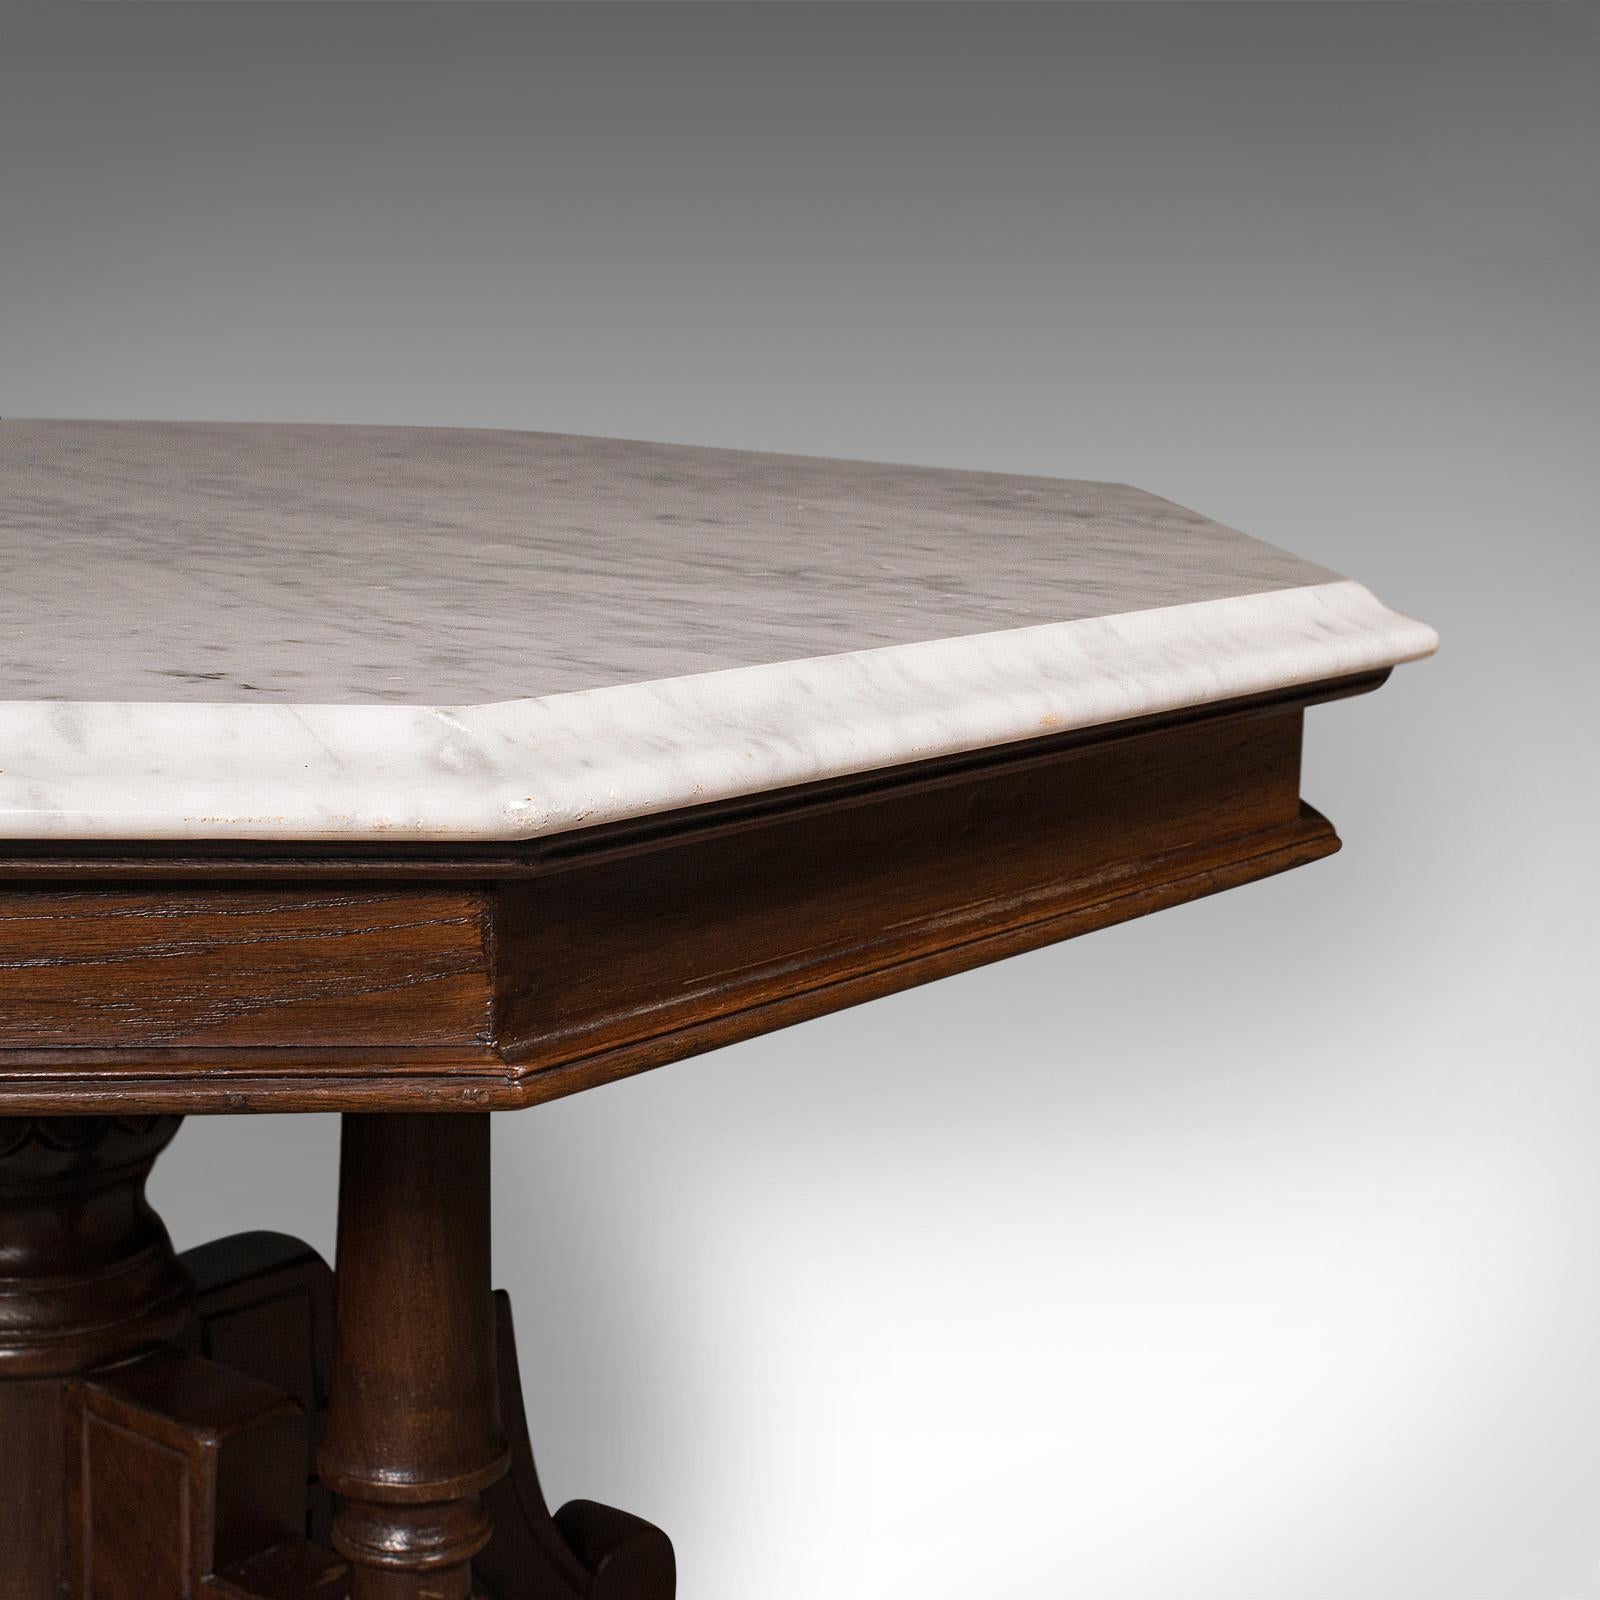 Antique Octagonal Coffee Table, English, Carrara Marble, Decorative, Victorian For Sale 2